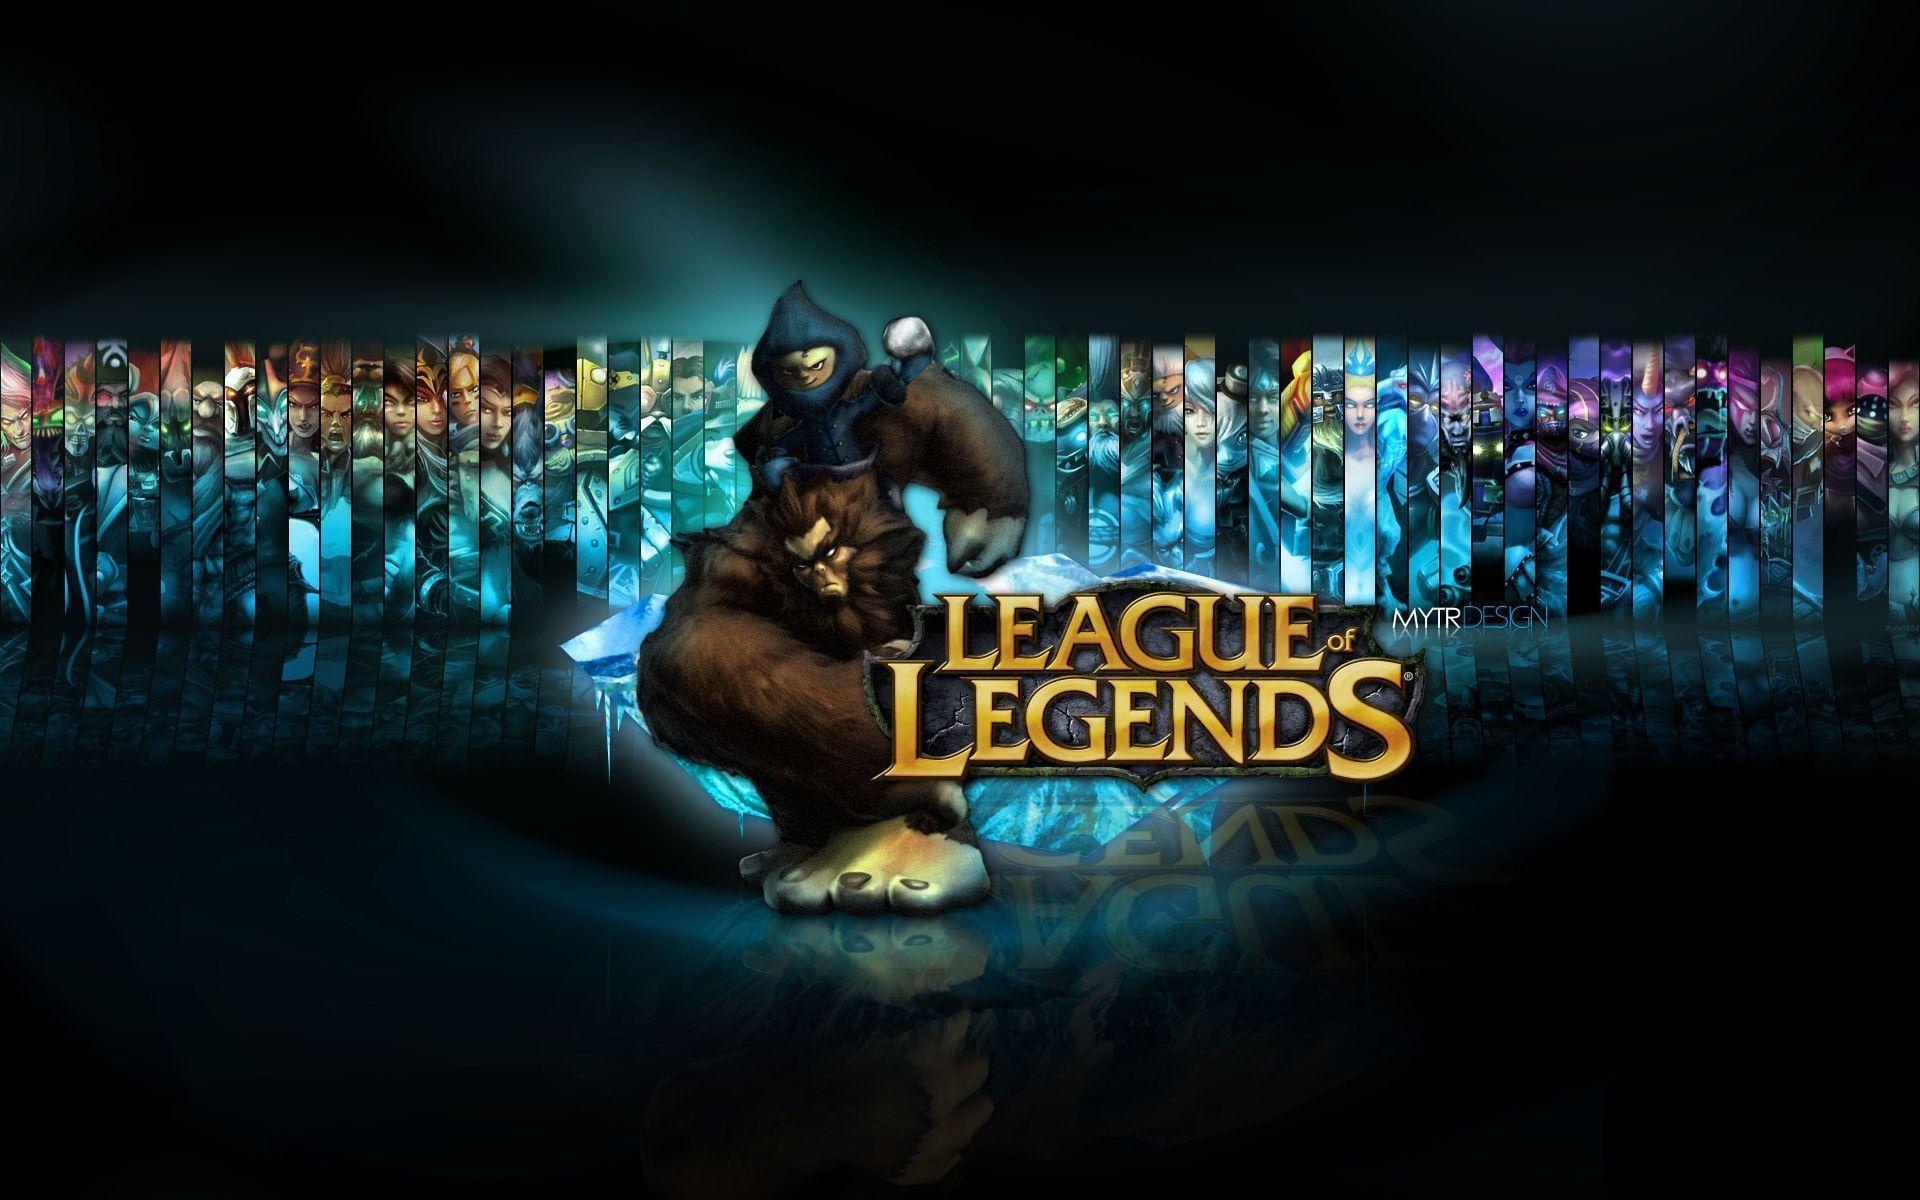 League of Legends free wallpaper in high quality video game